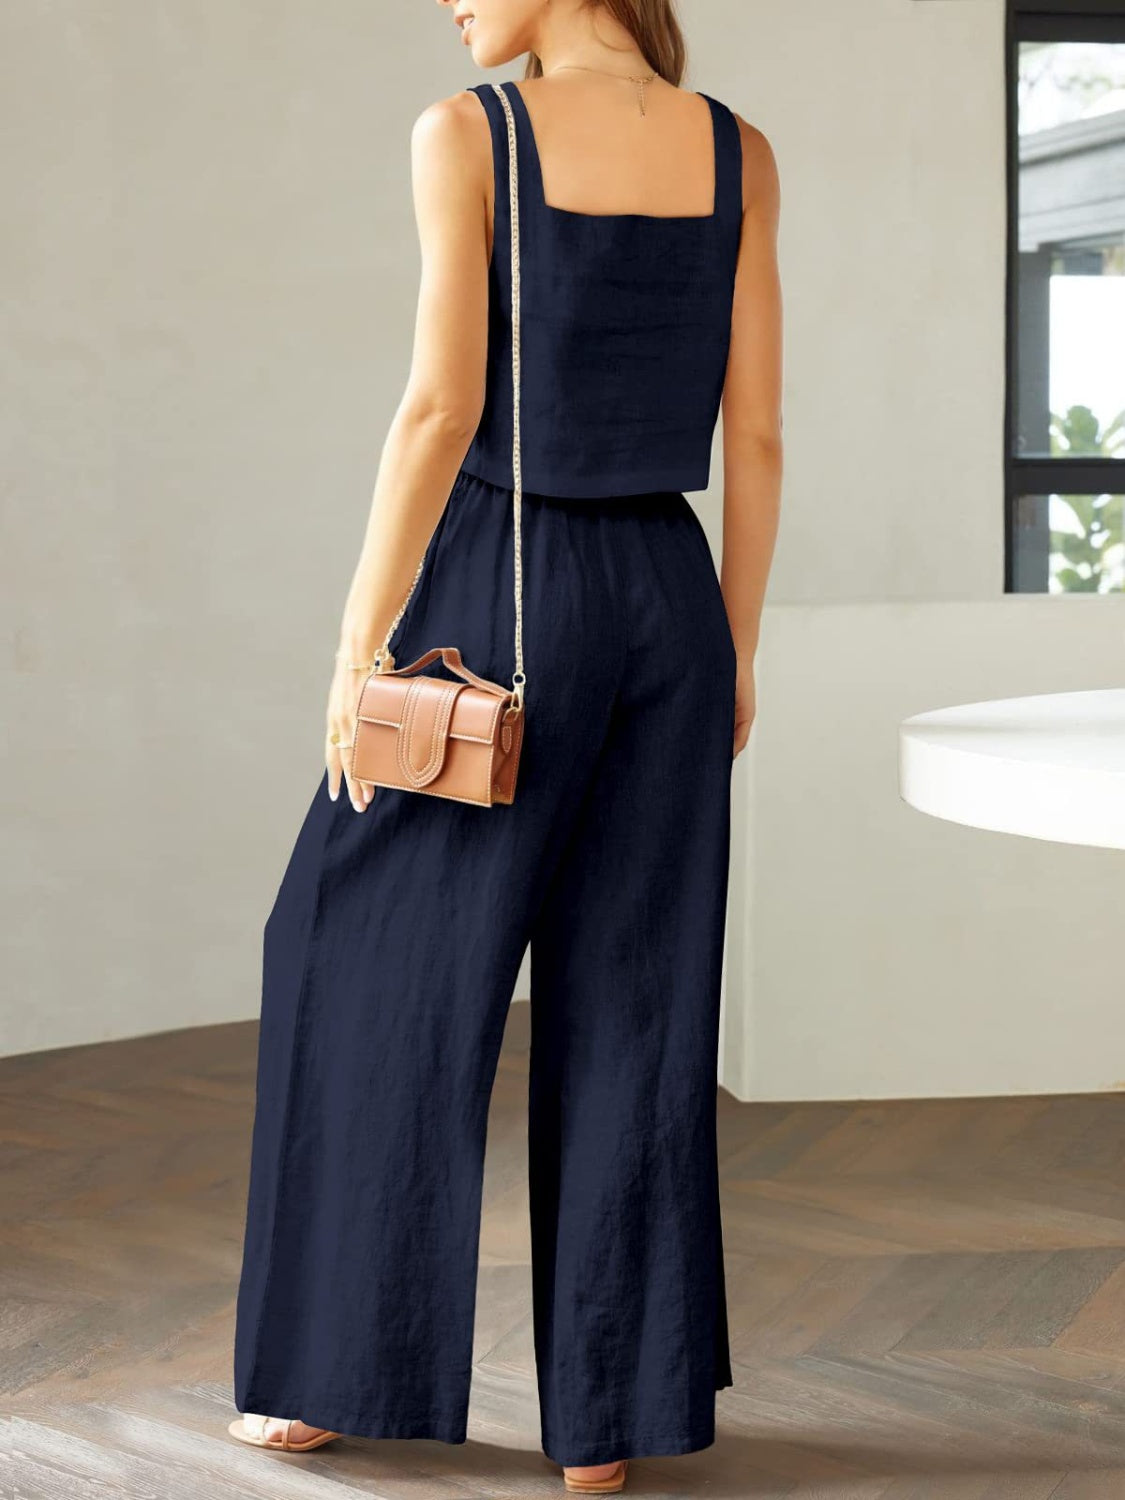 If I could Turn Back Time Top & Wide Leg Pants Set